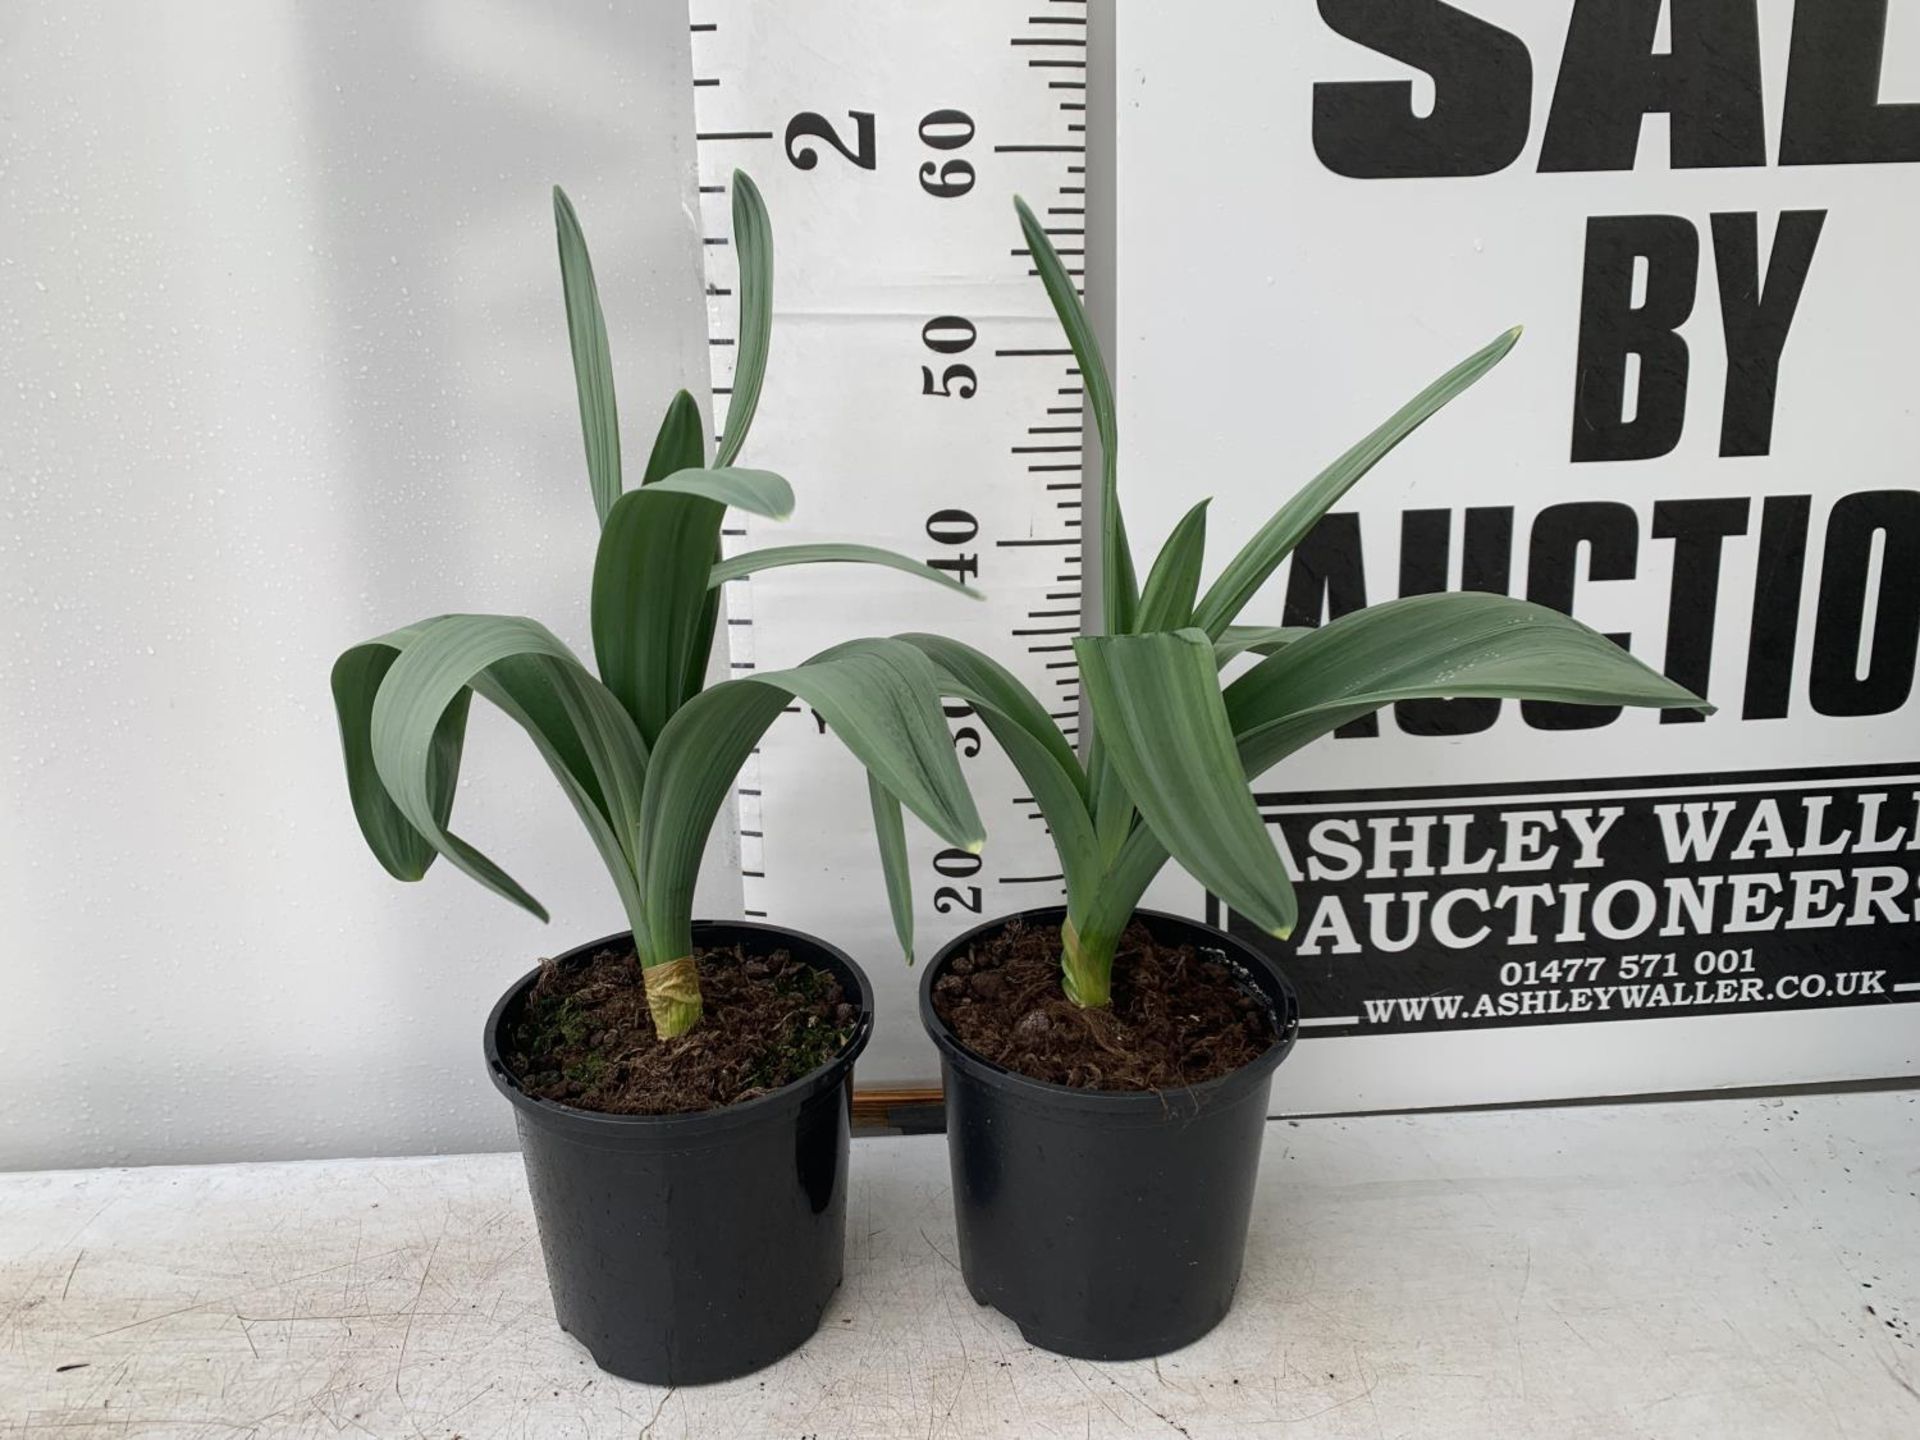 TWO ALLIUMS 'MOUNT EVEREST' IN A 3 LTR POT APPROX 60CM IN HEIGHT PLUS VAT TO BE SOLD FOR THE TWO